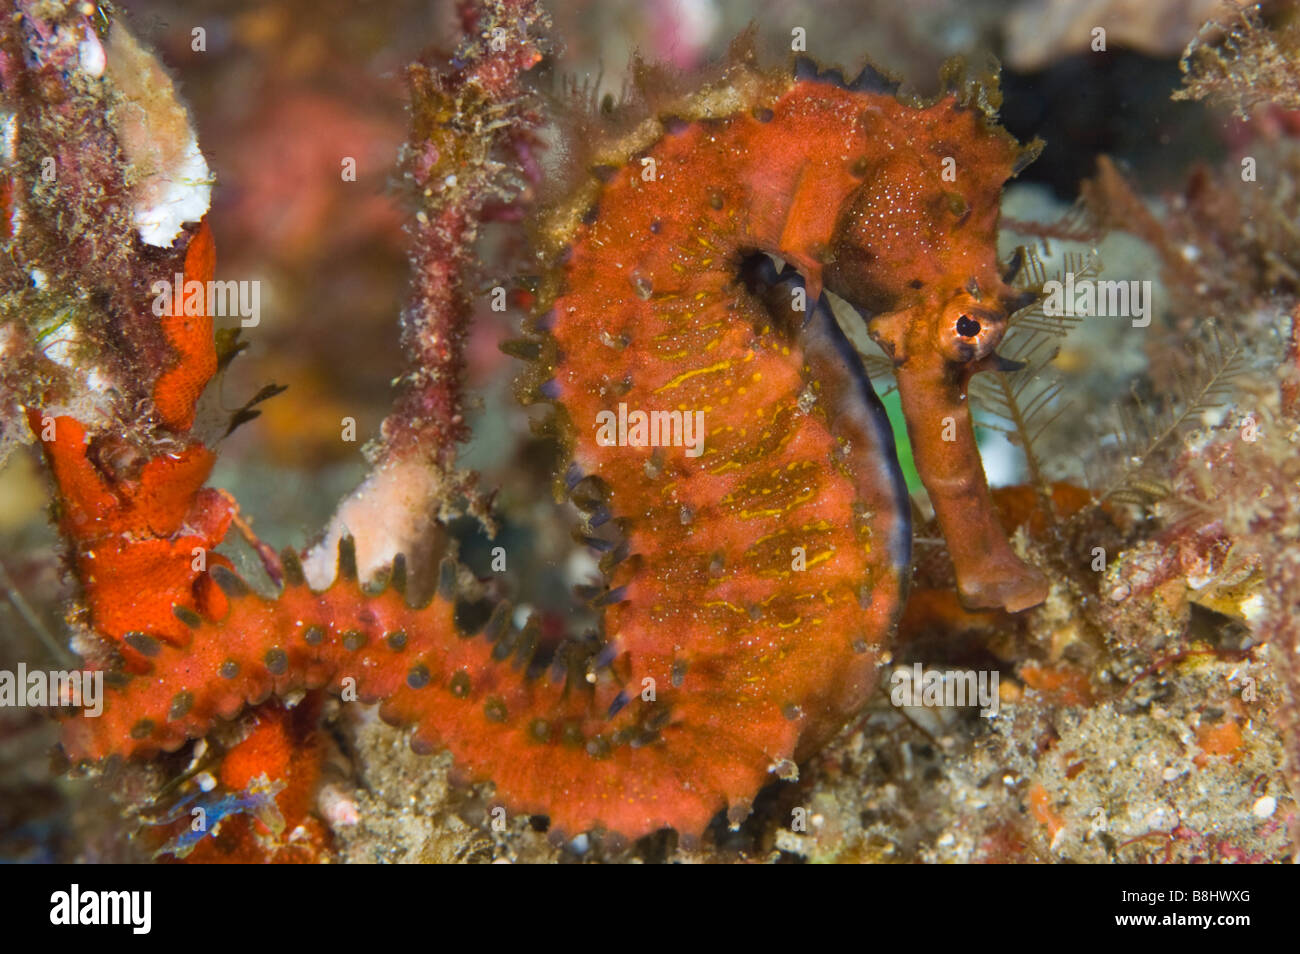 A red seahorse is attached to a piece of sponge on the reef in Sodwana Bay. Stock Photo